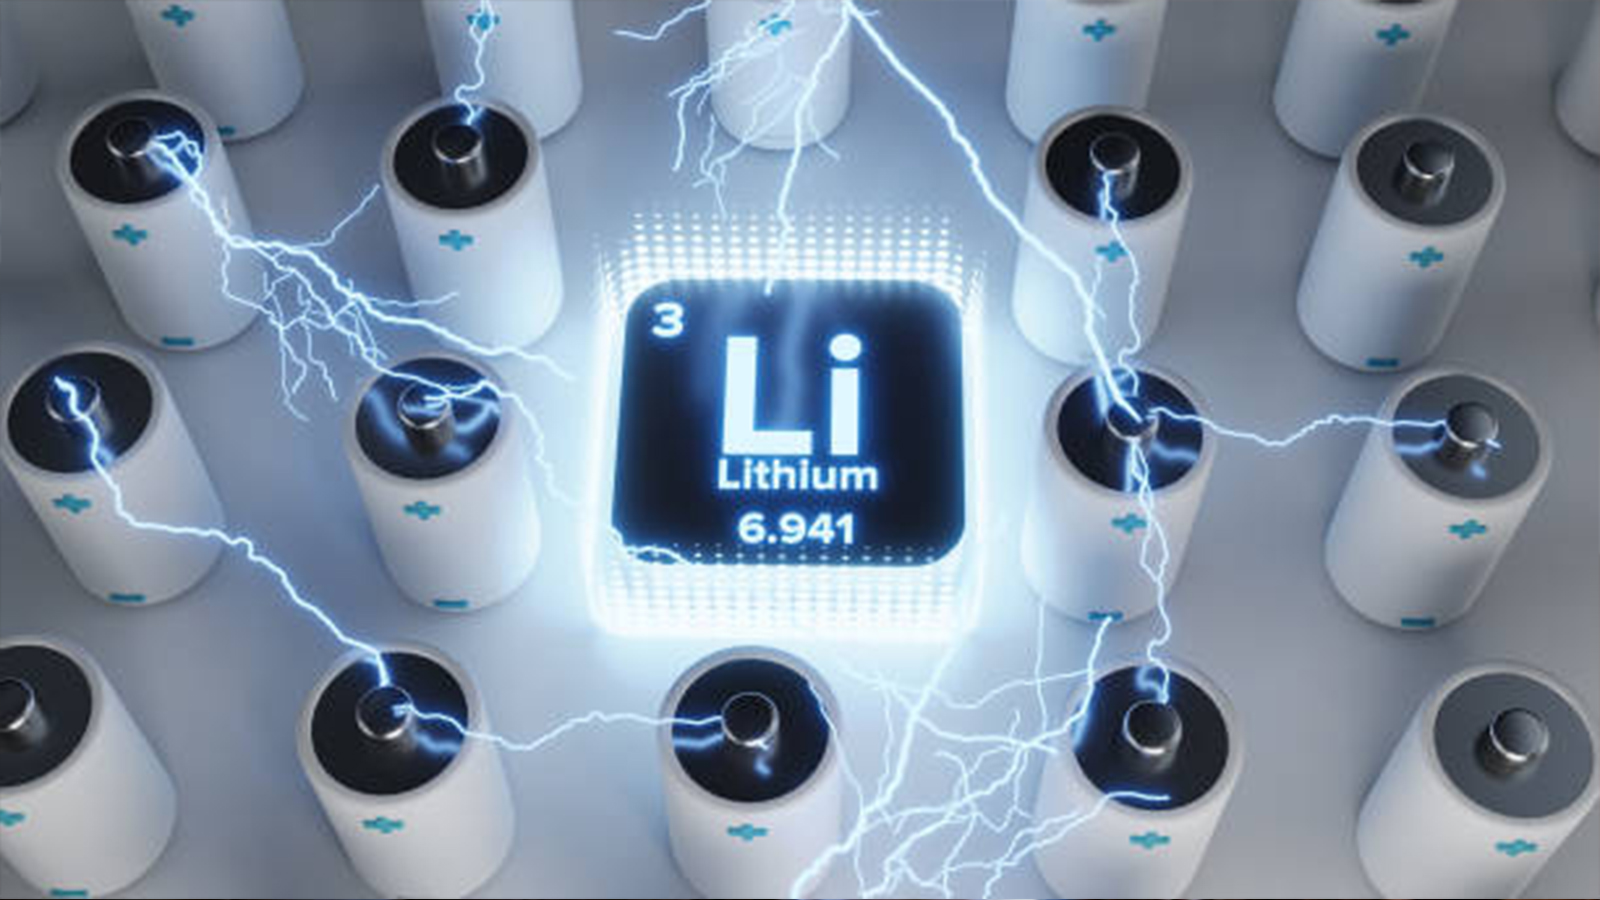 What Are the Advantages and Disadvantages of Using Lithium Batteries in Electronics?